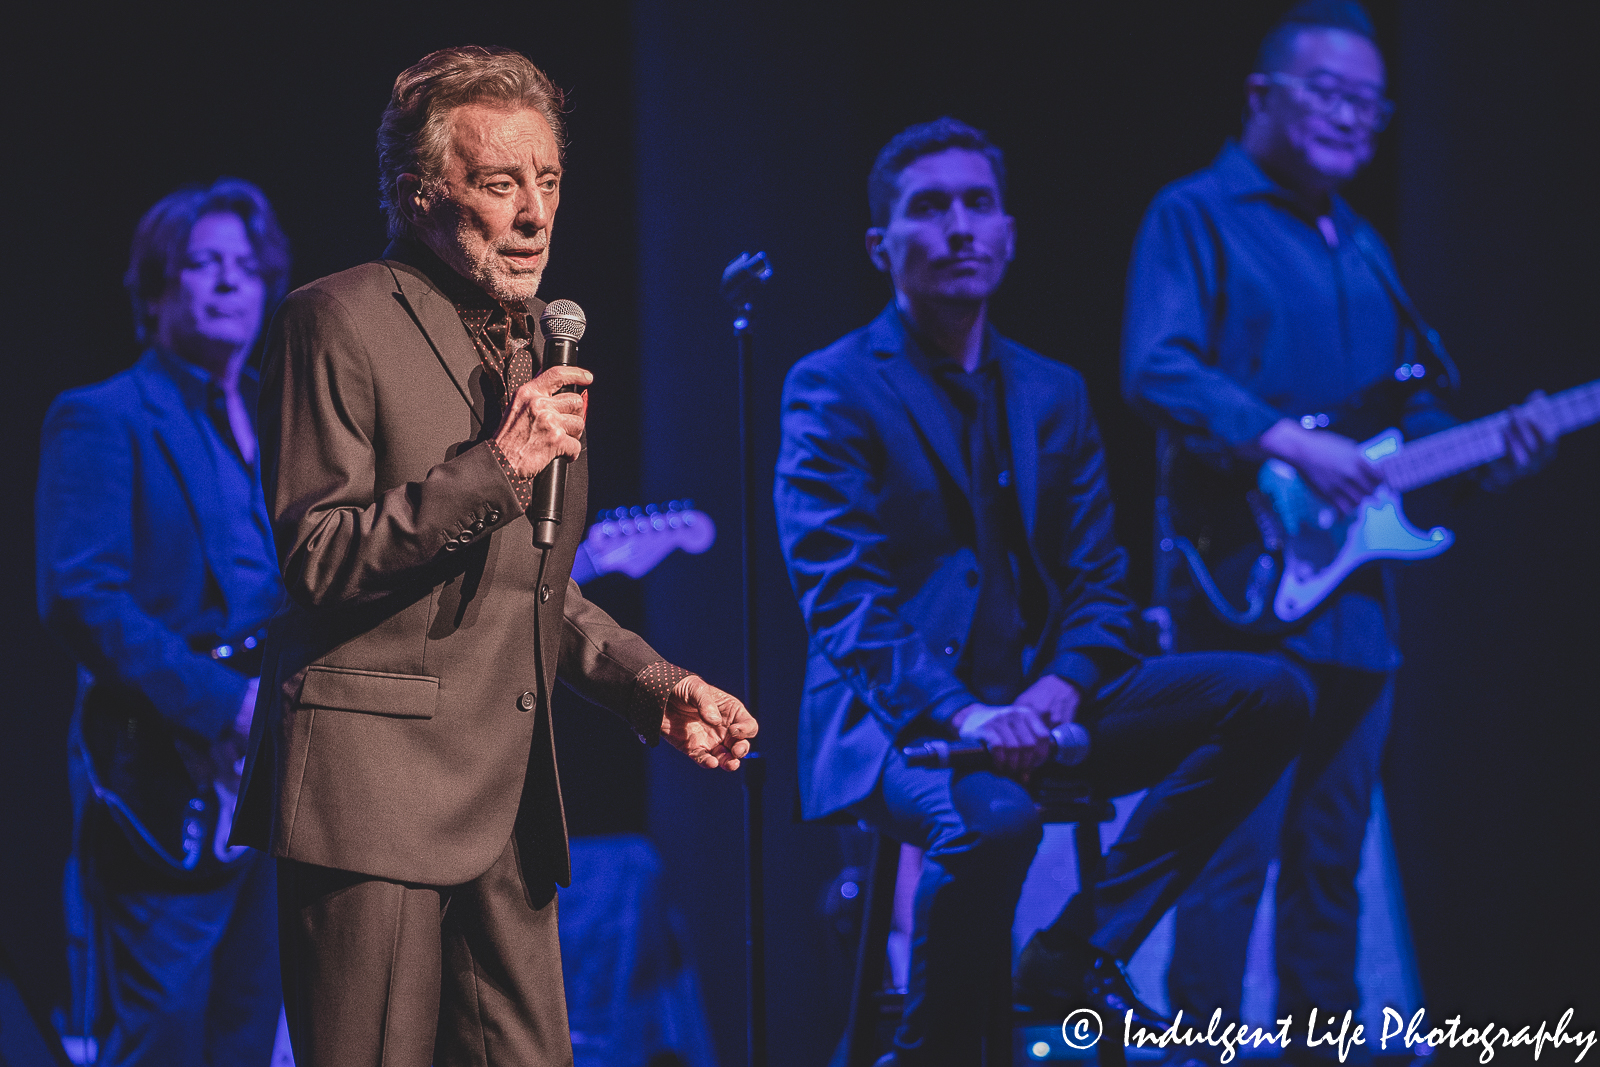 Frankie Valli and band live in concert at Muriel Kauffman Theatre in downtown Kansas City, MO on June 4, 2022.